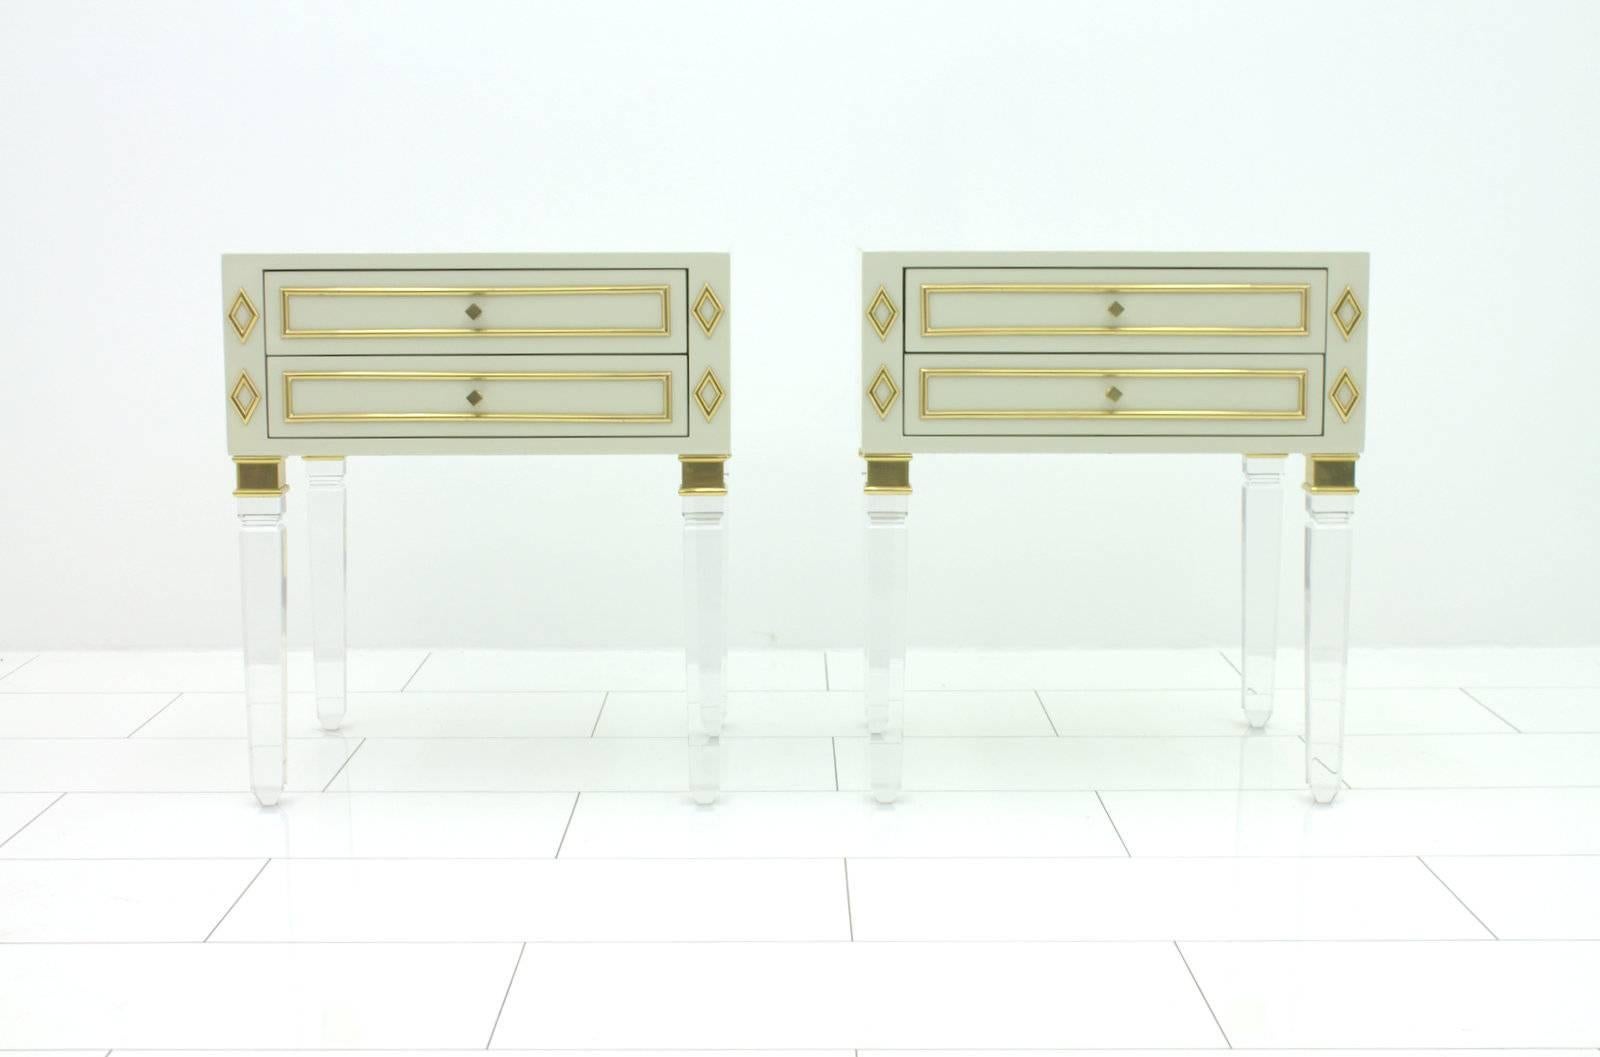 Pair of Nightstands in Lucite, wood and brass, 1970s.
Very good condition.

Worldwide shipping.